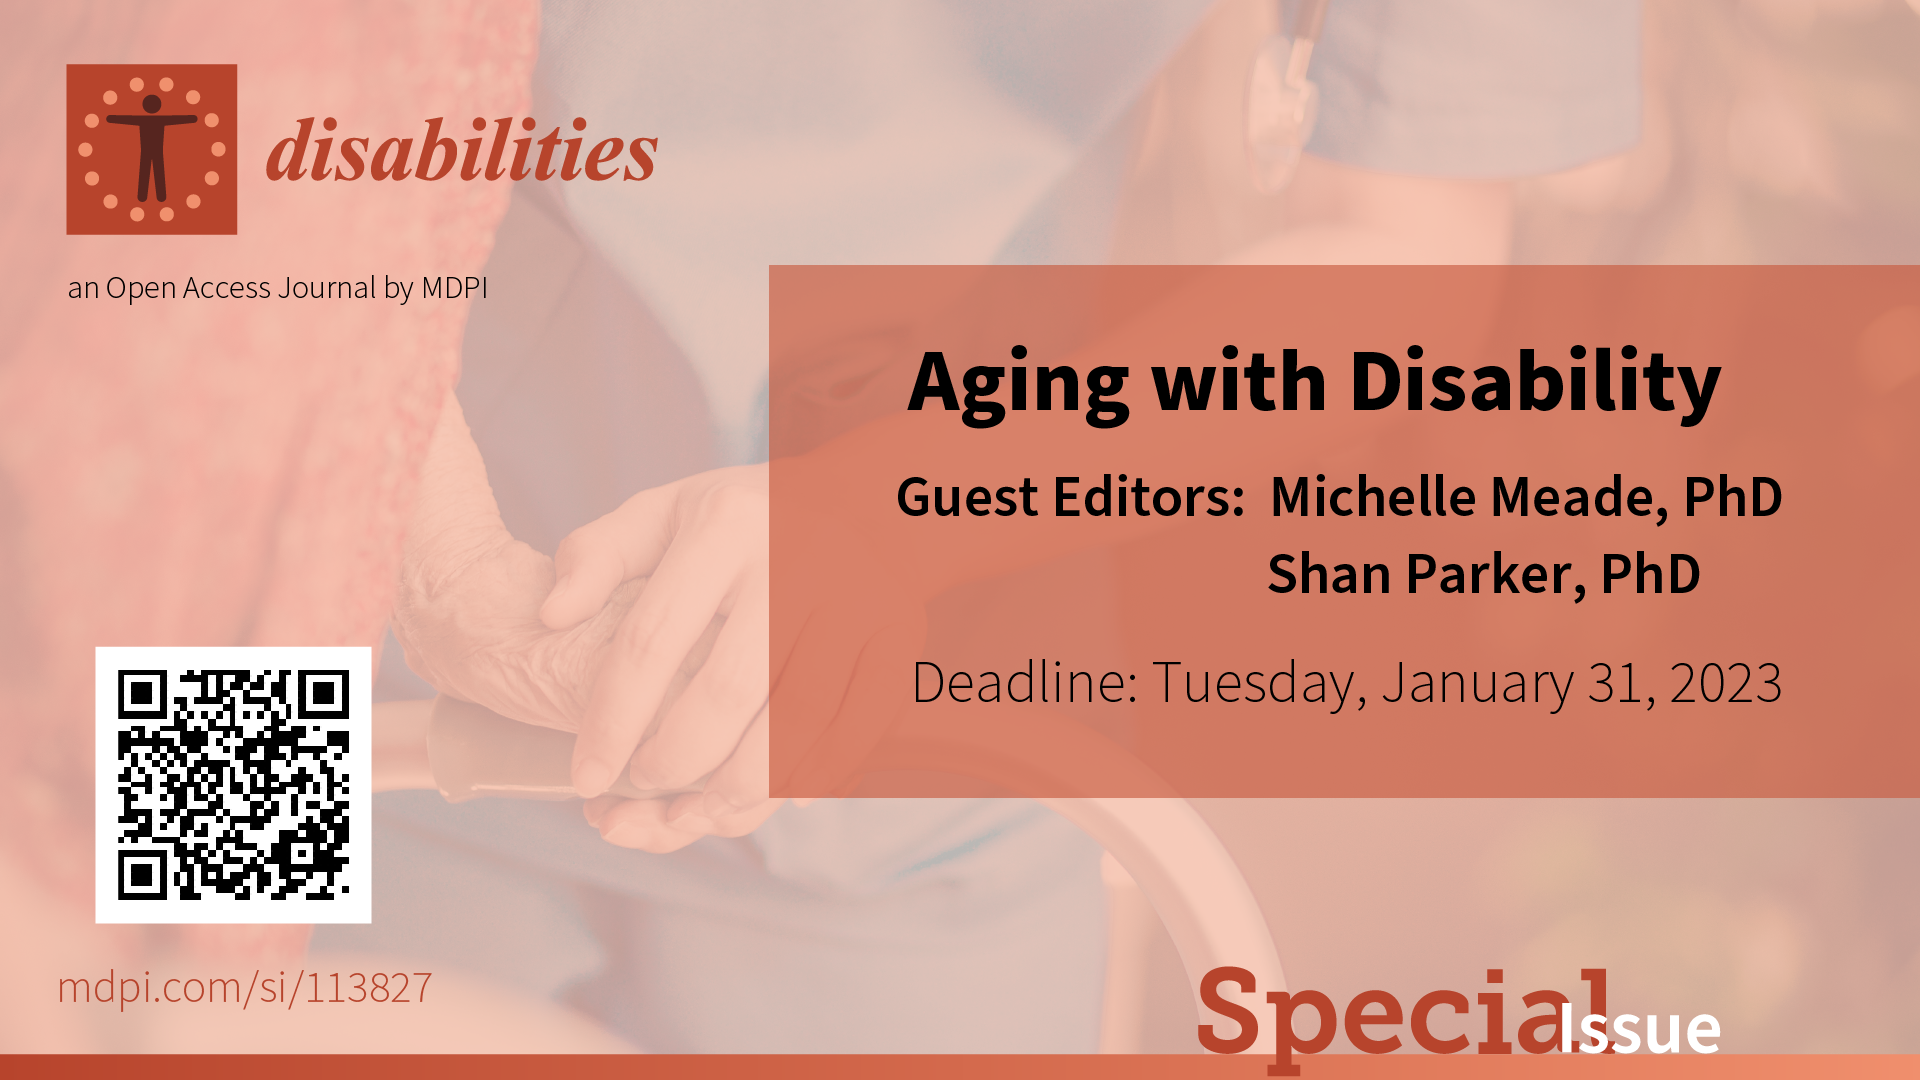 Flyer with aging with disability special issue information